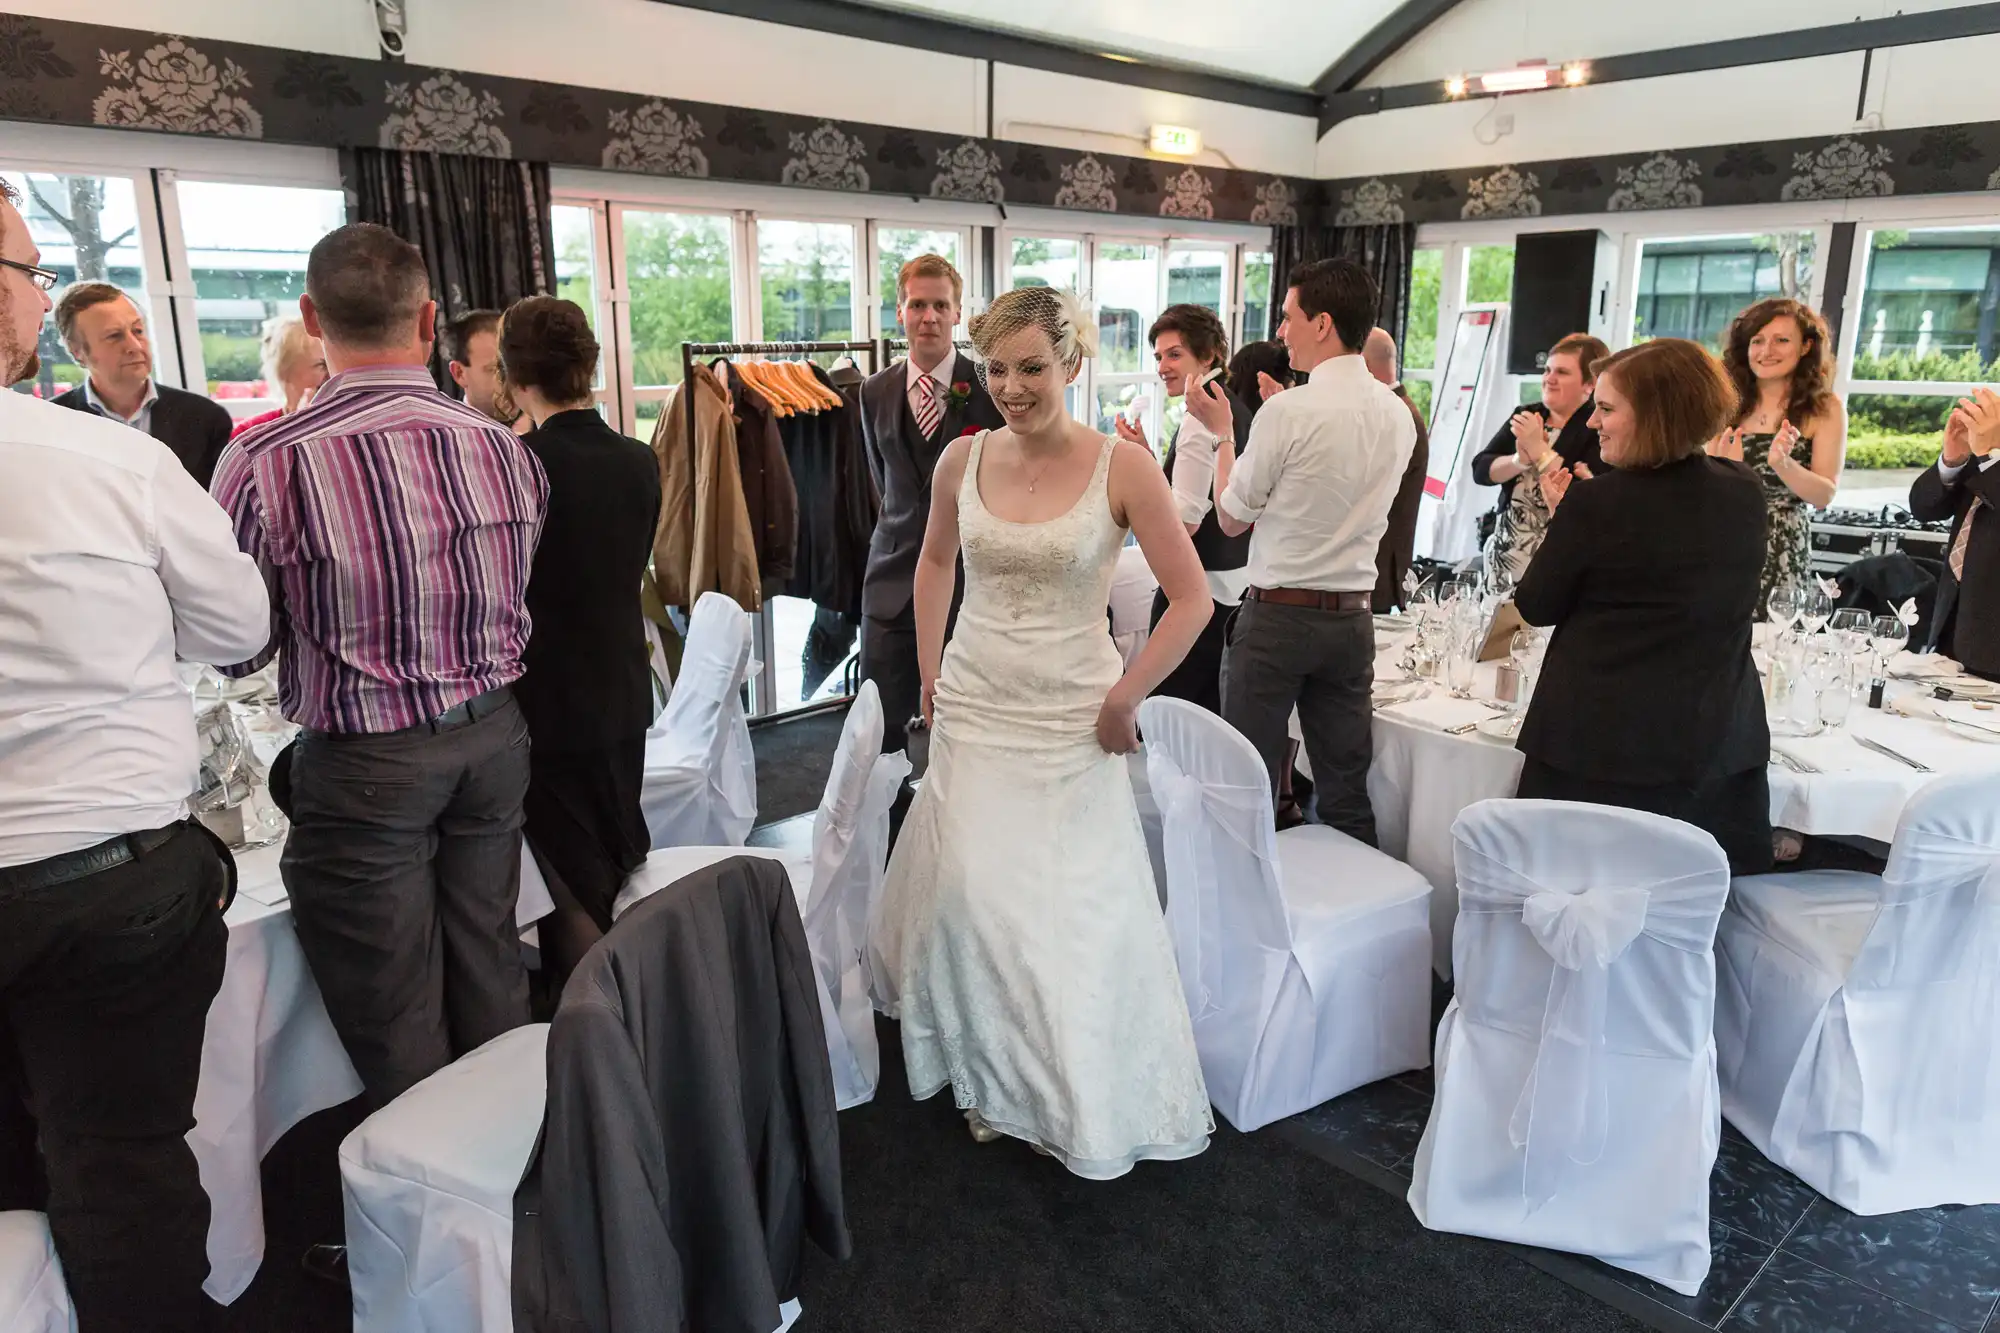 A bride in a white gown walking through a busy wedding reception hall filled with guests and adorned tables.